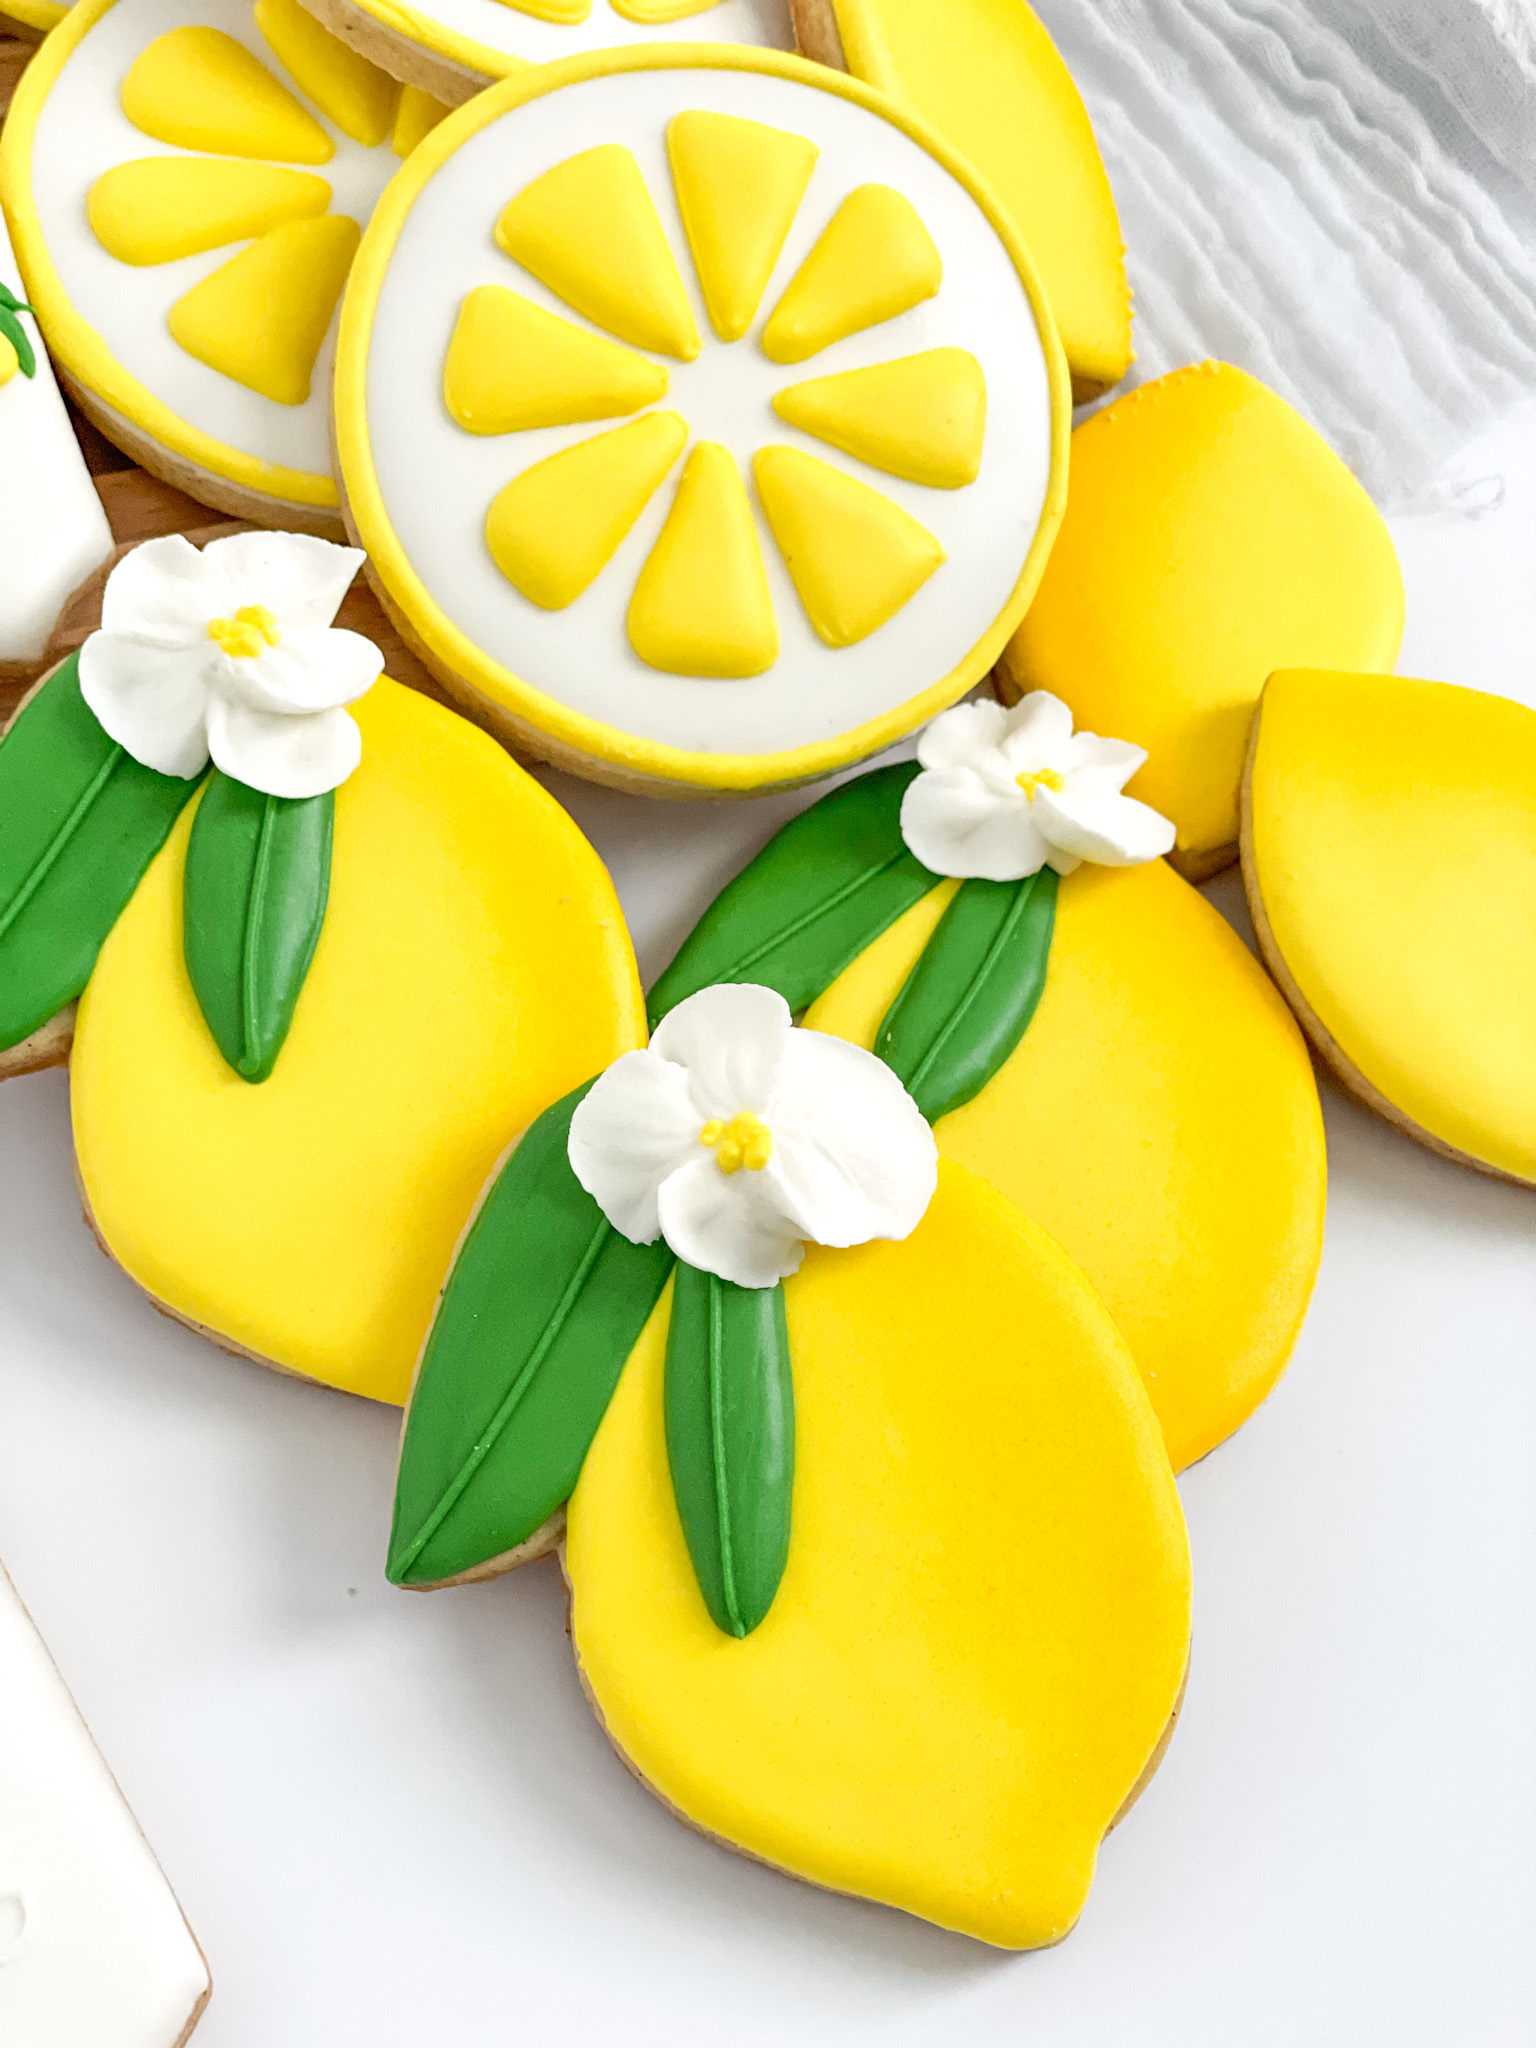 lemon slices and lemons with flowers